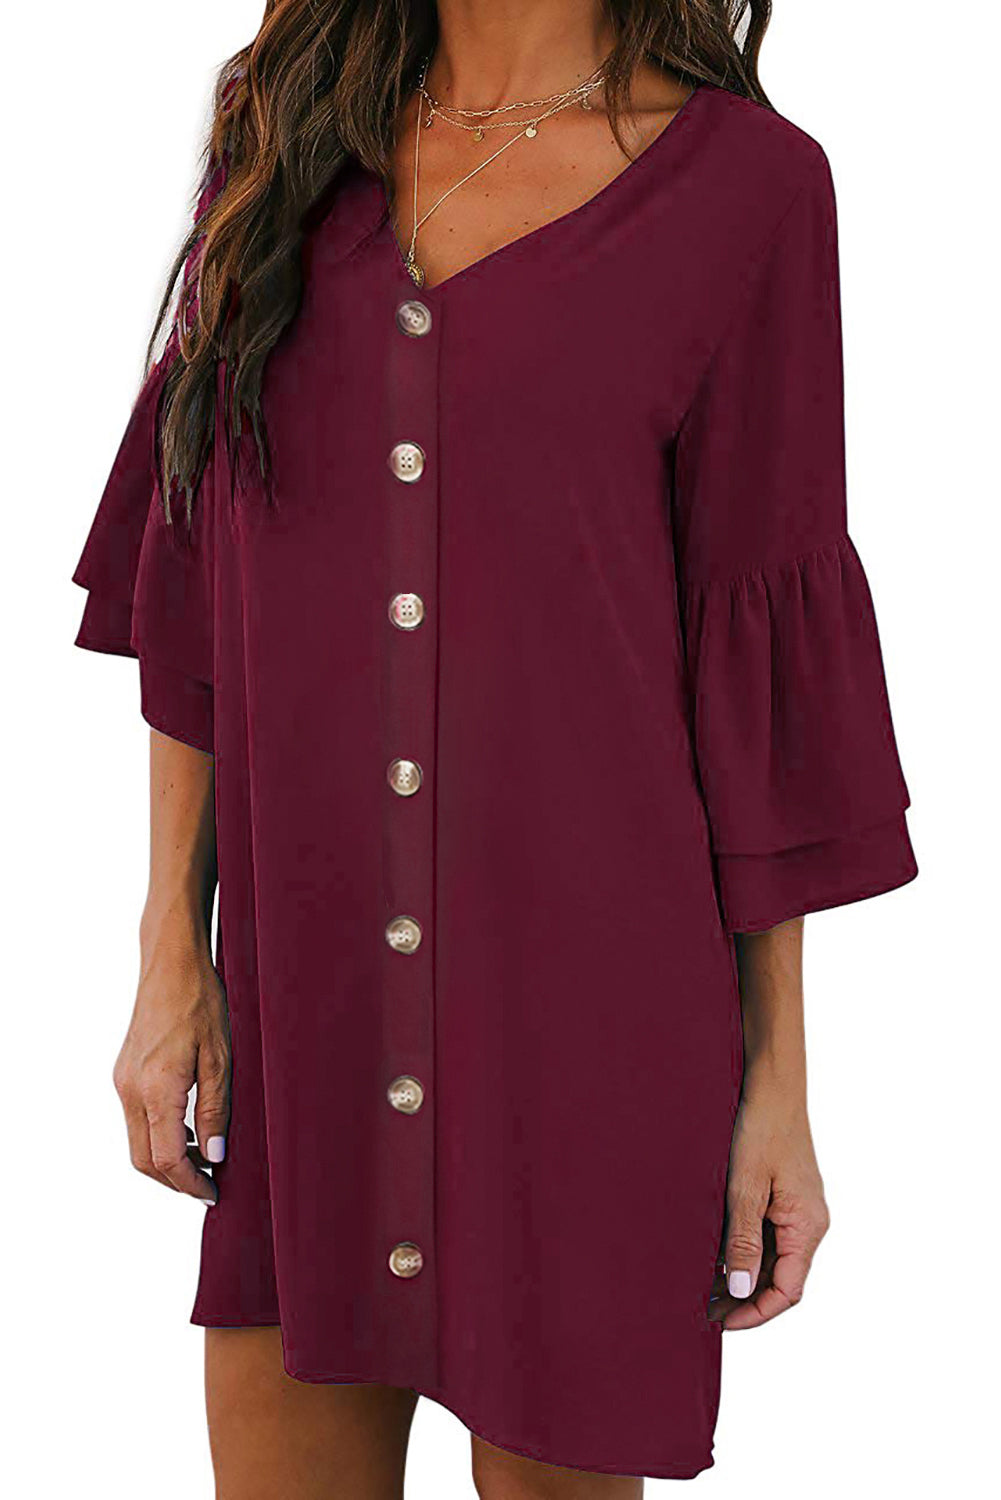 Red White/Black/Red/Green V Neck Buttoned Bell Sleeve Shift Shirt Dress LC221177-3